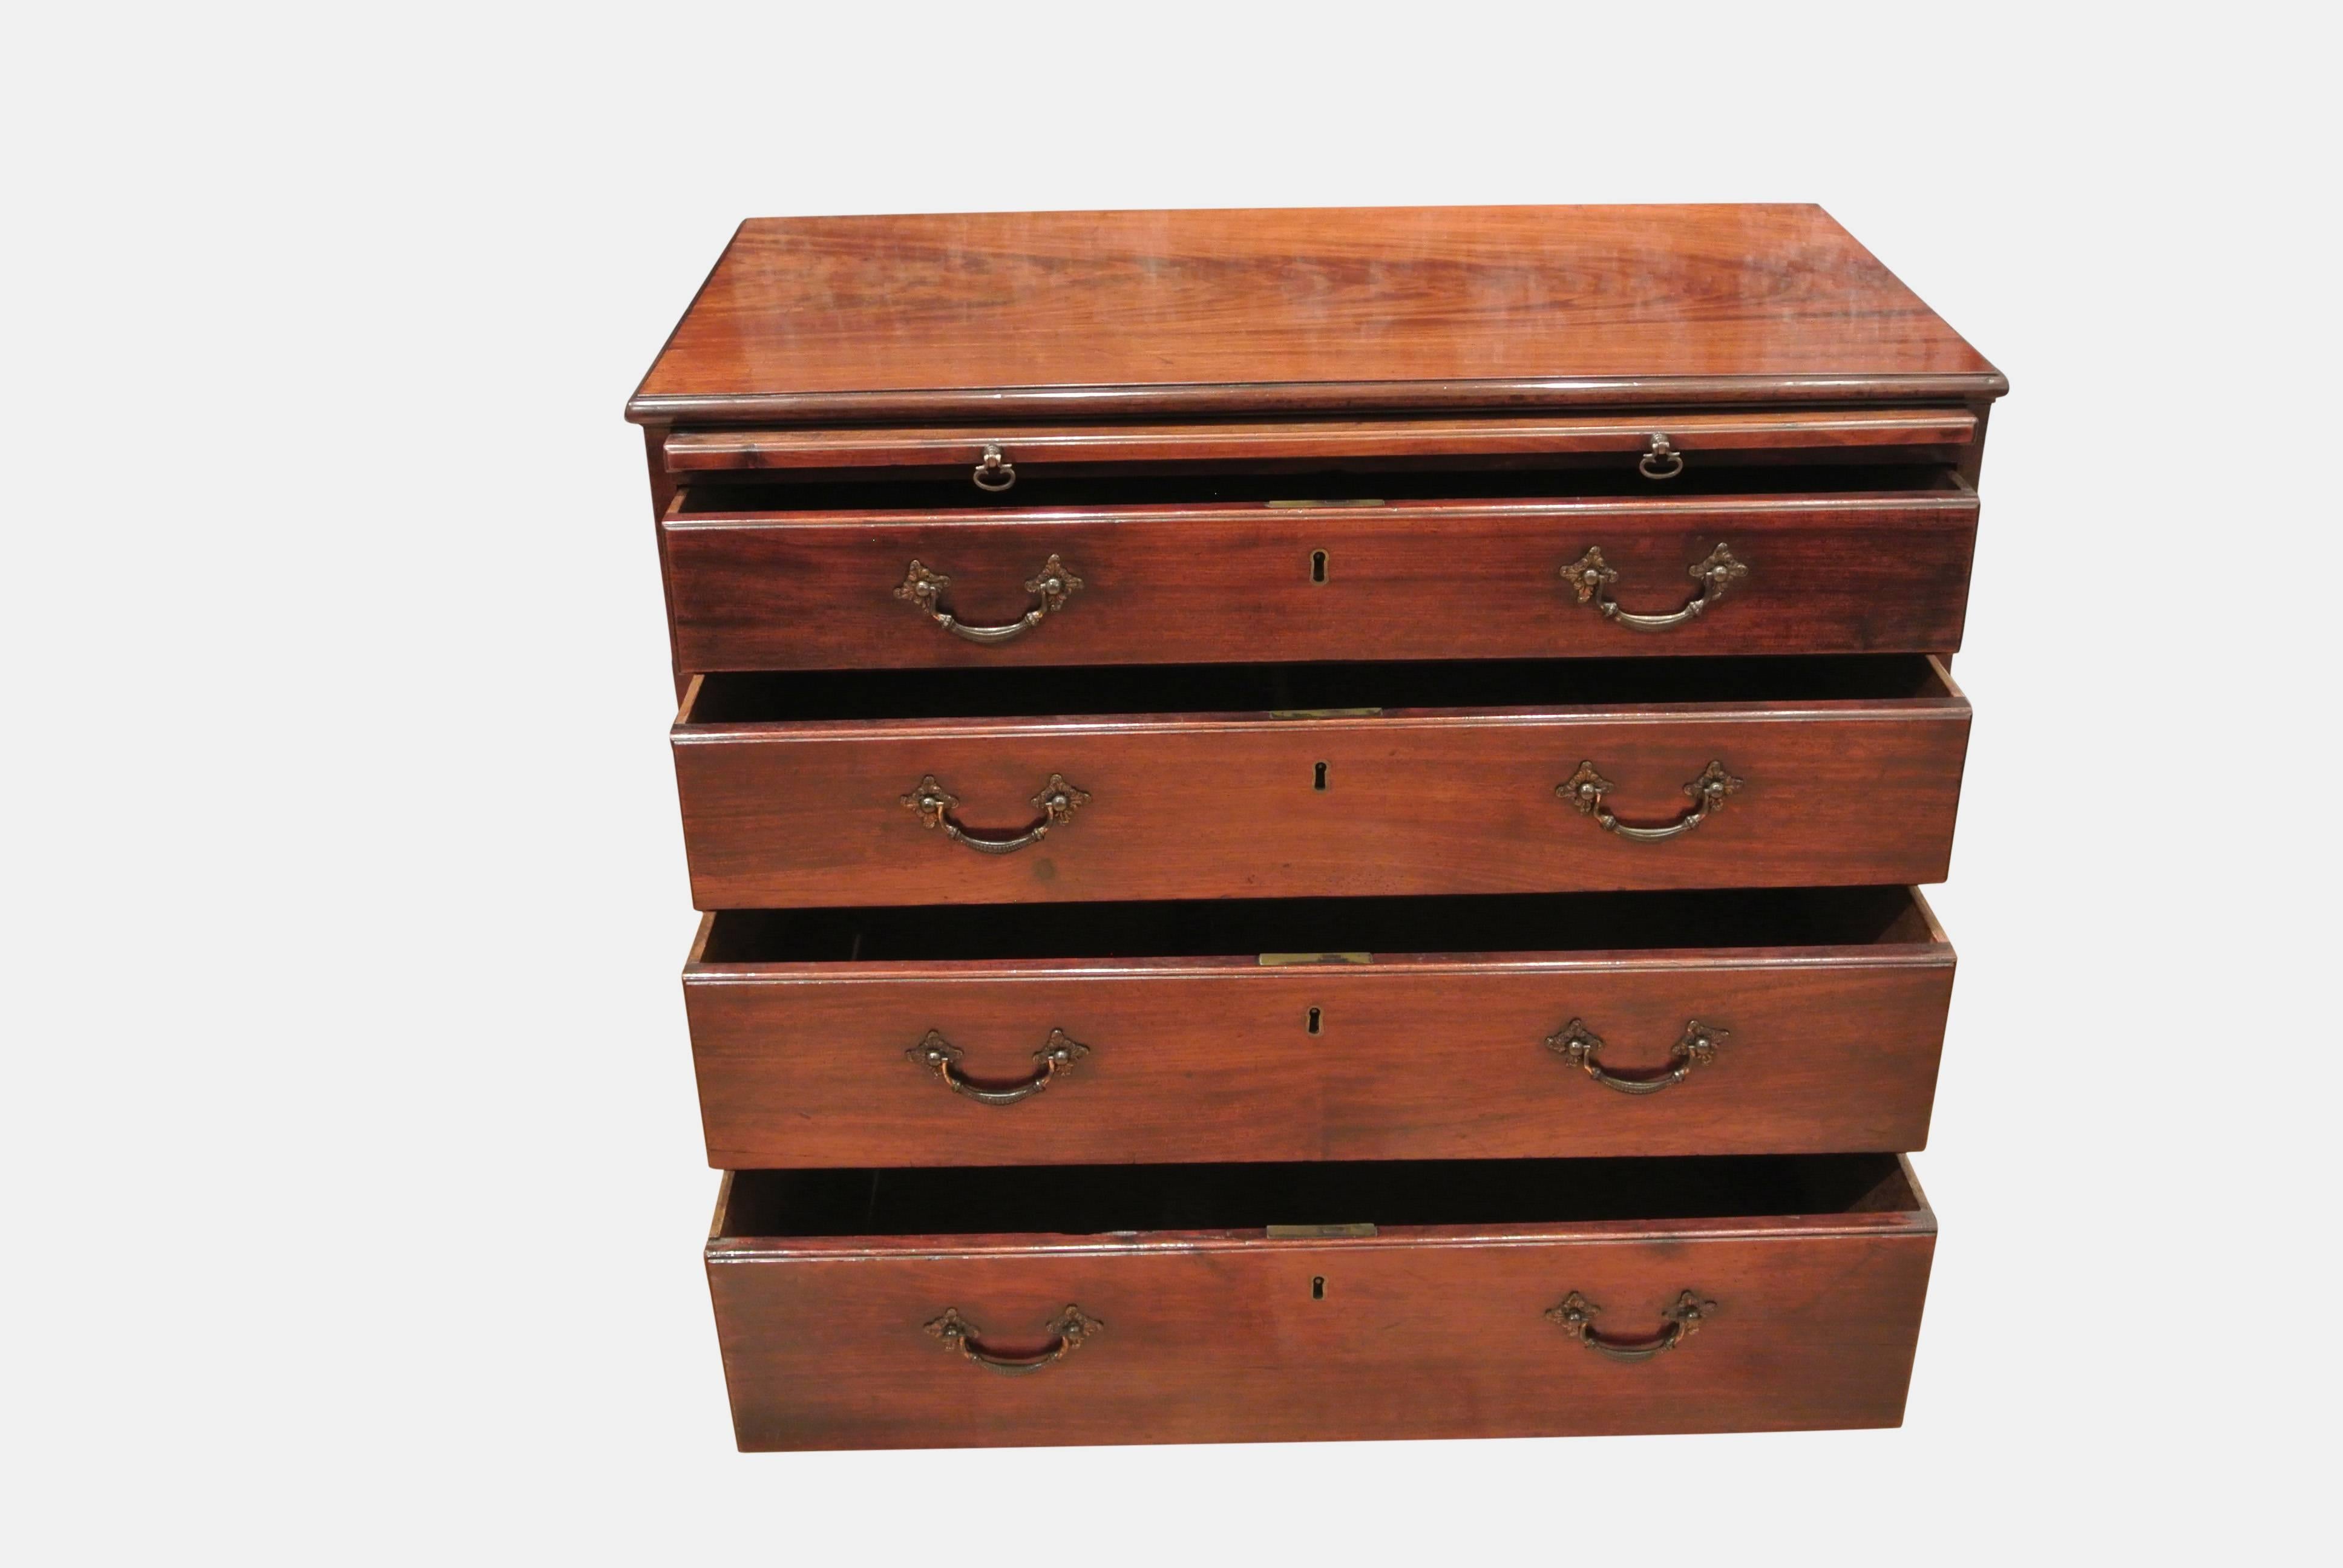 A fine quality Chippendale period mahogany chest of drawers with brushing slide and brass handles on bracket feet. In excellent original condition.